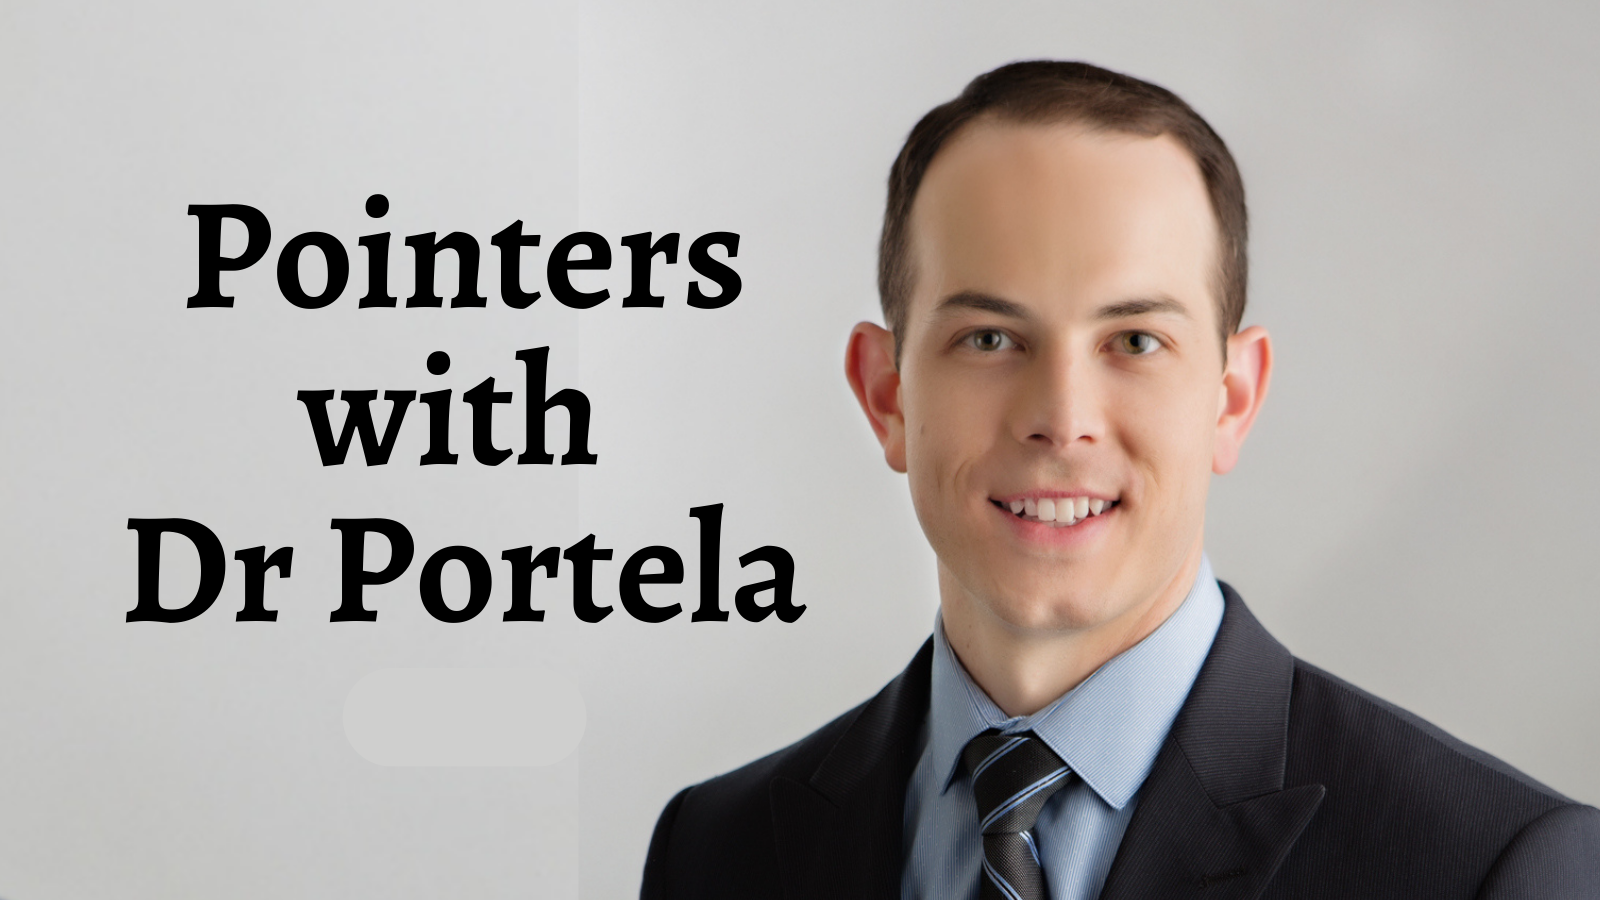 Pointers with Dr Portela: Interviewing Dermatologists at AAD